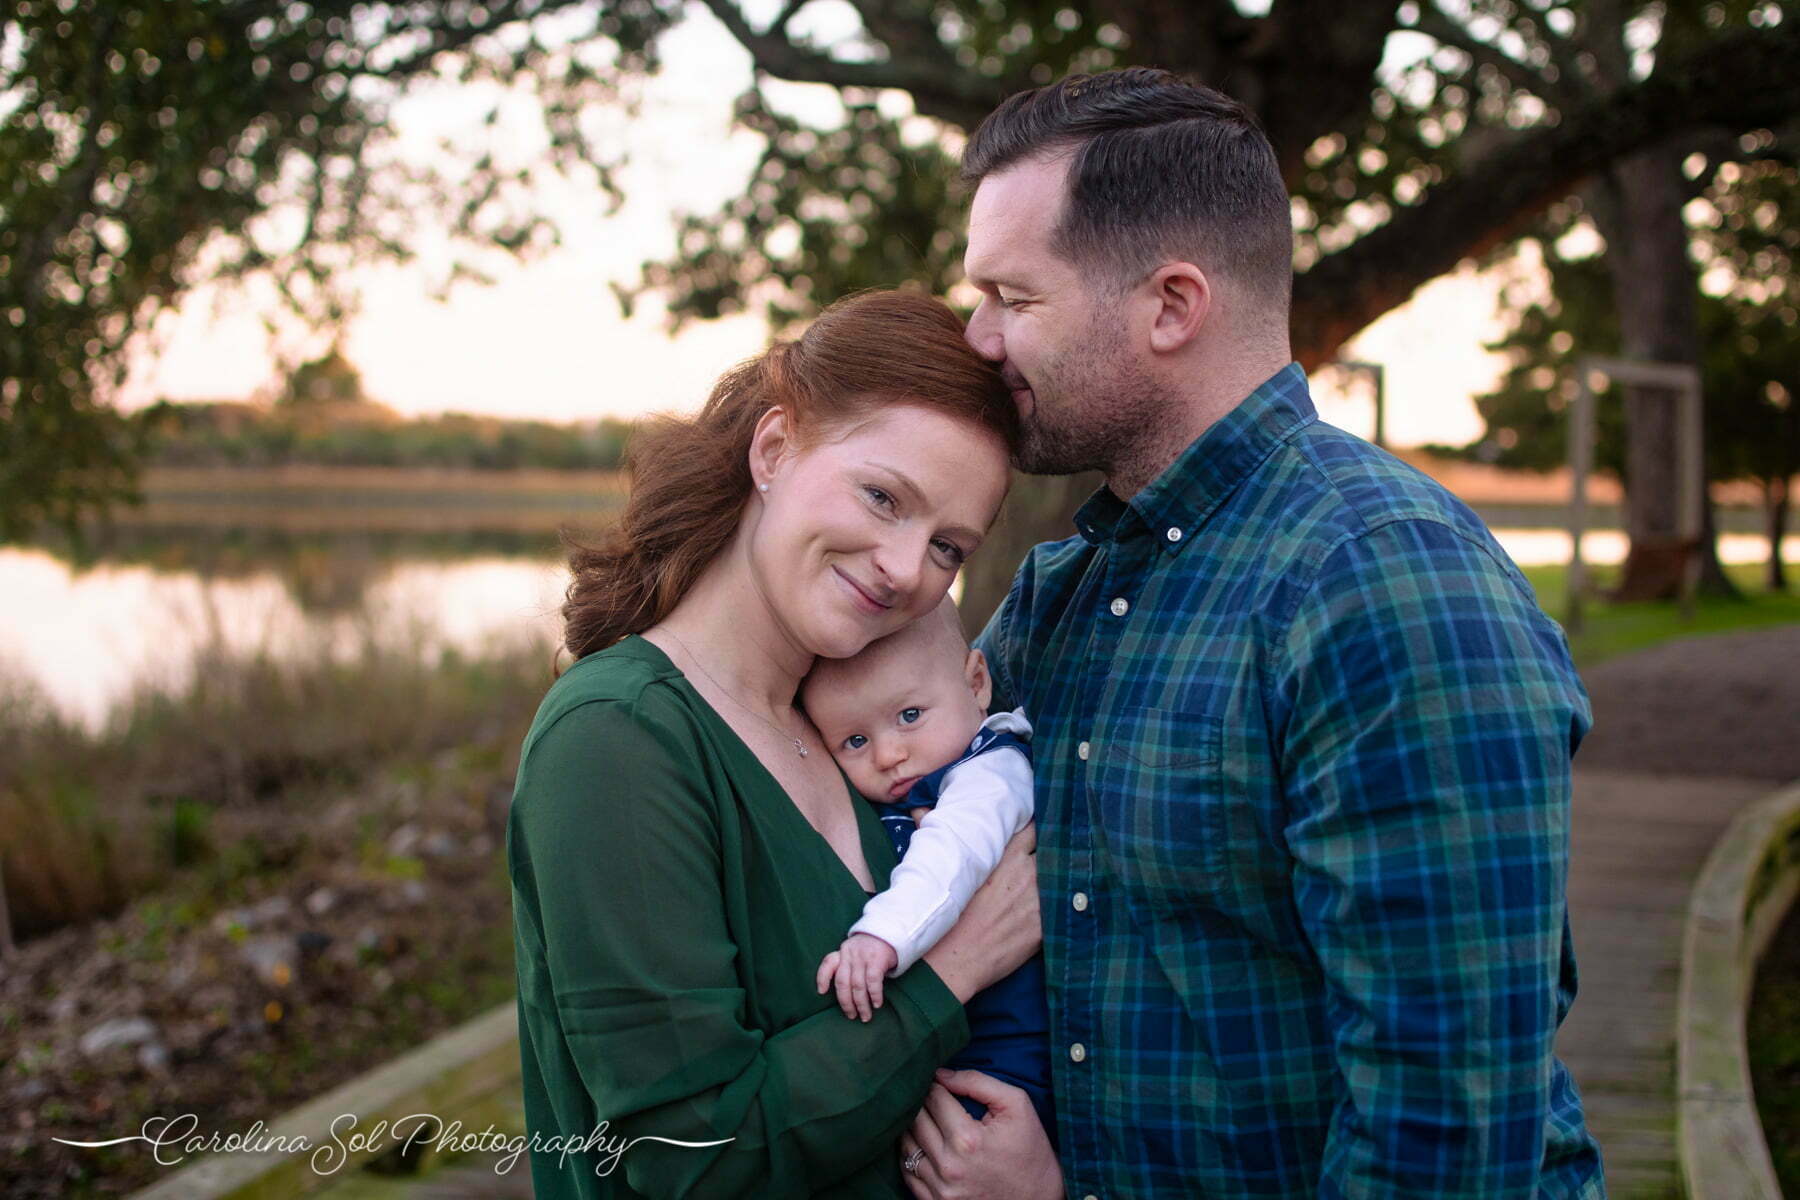 Lifestyle family photography session with newborn at Sunset Beach Park.